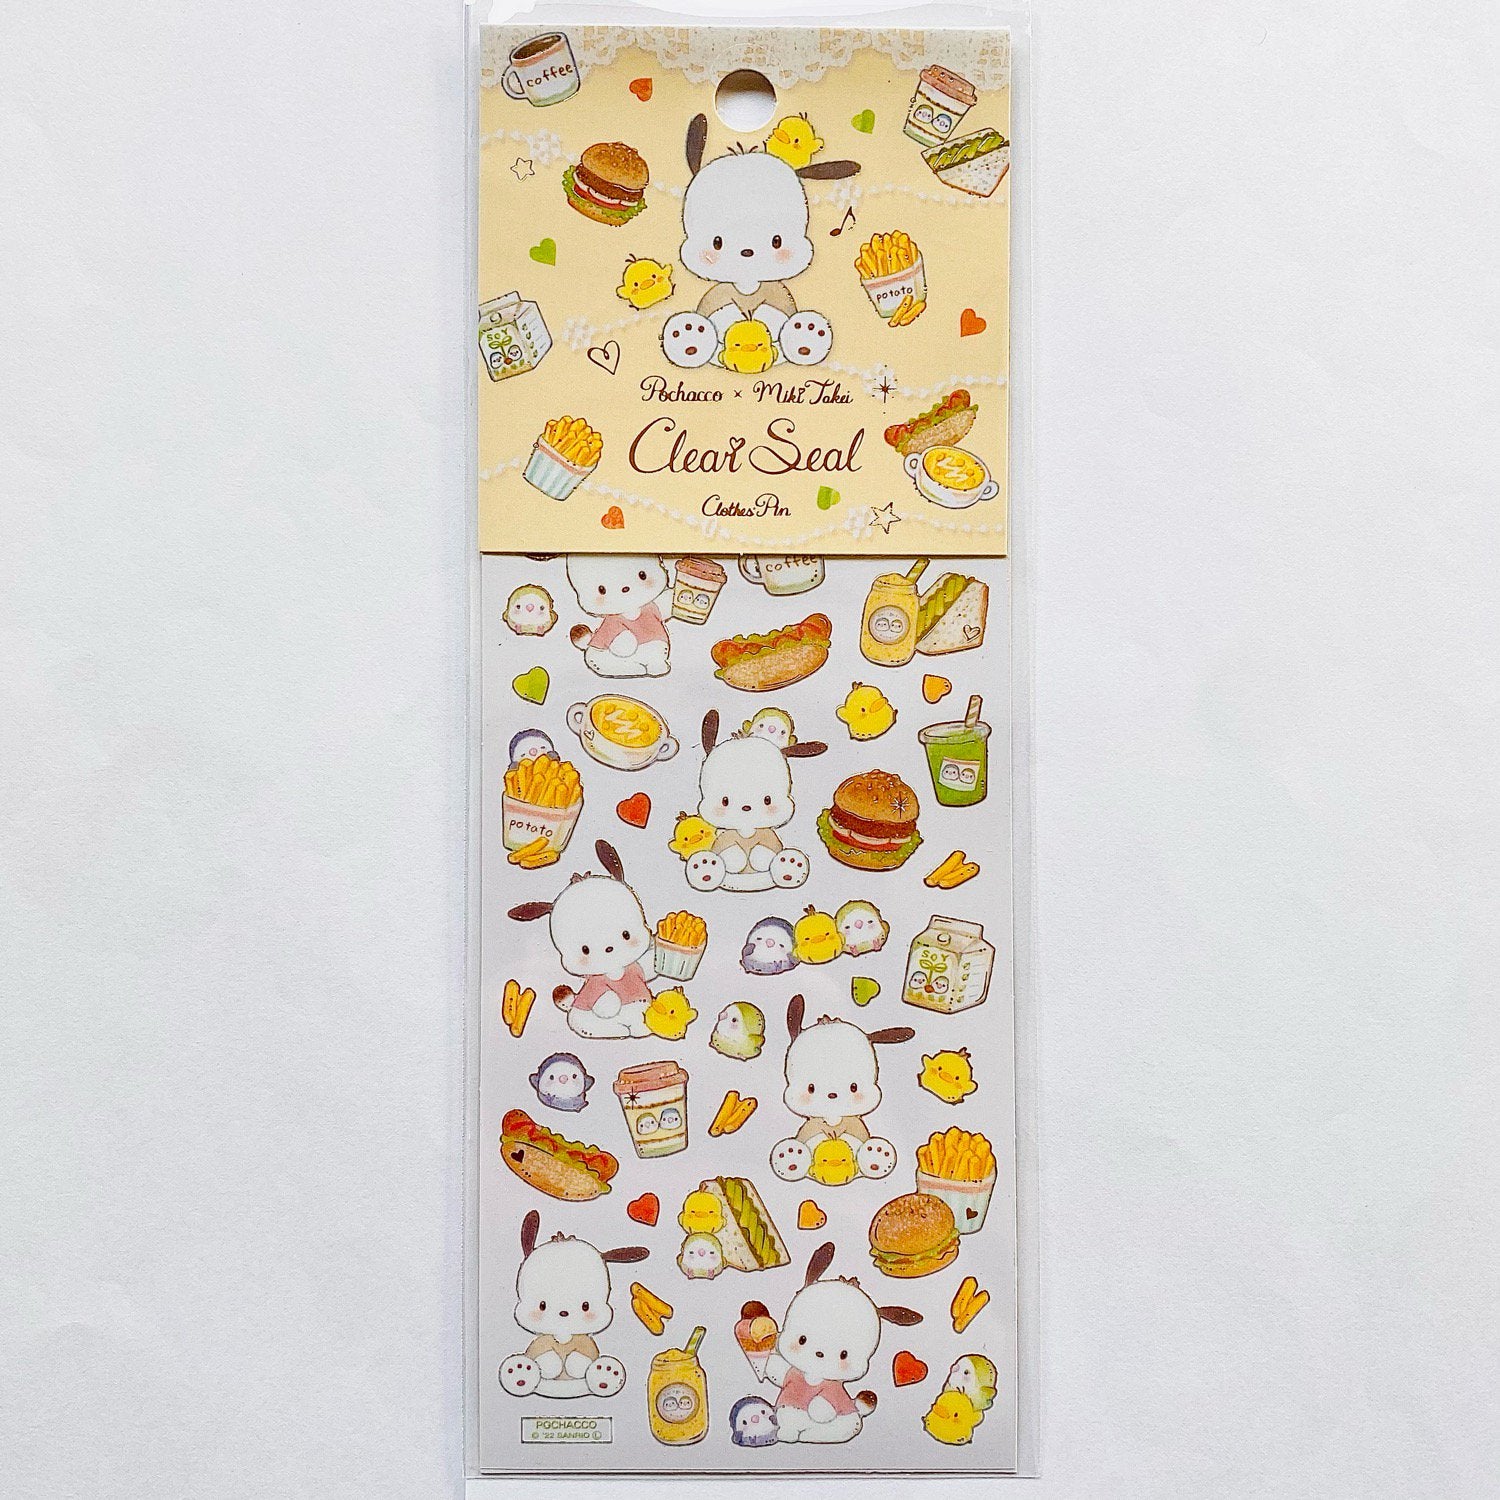 Clothes Pin Pochacco x Miki Takei Clear Seal Natural Food